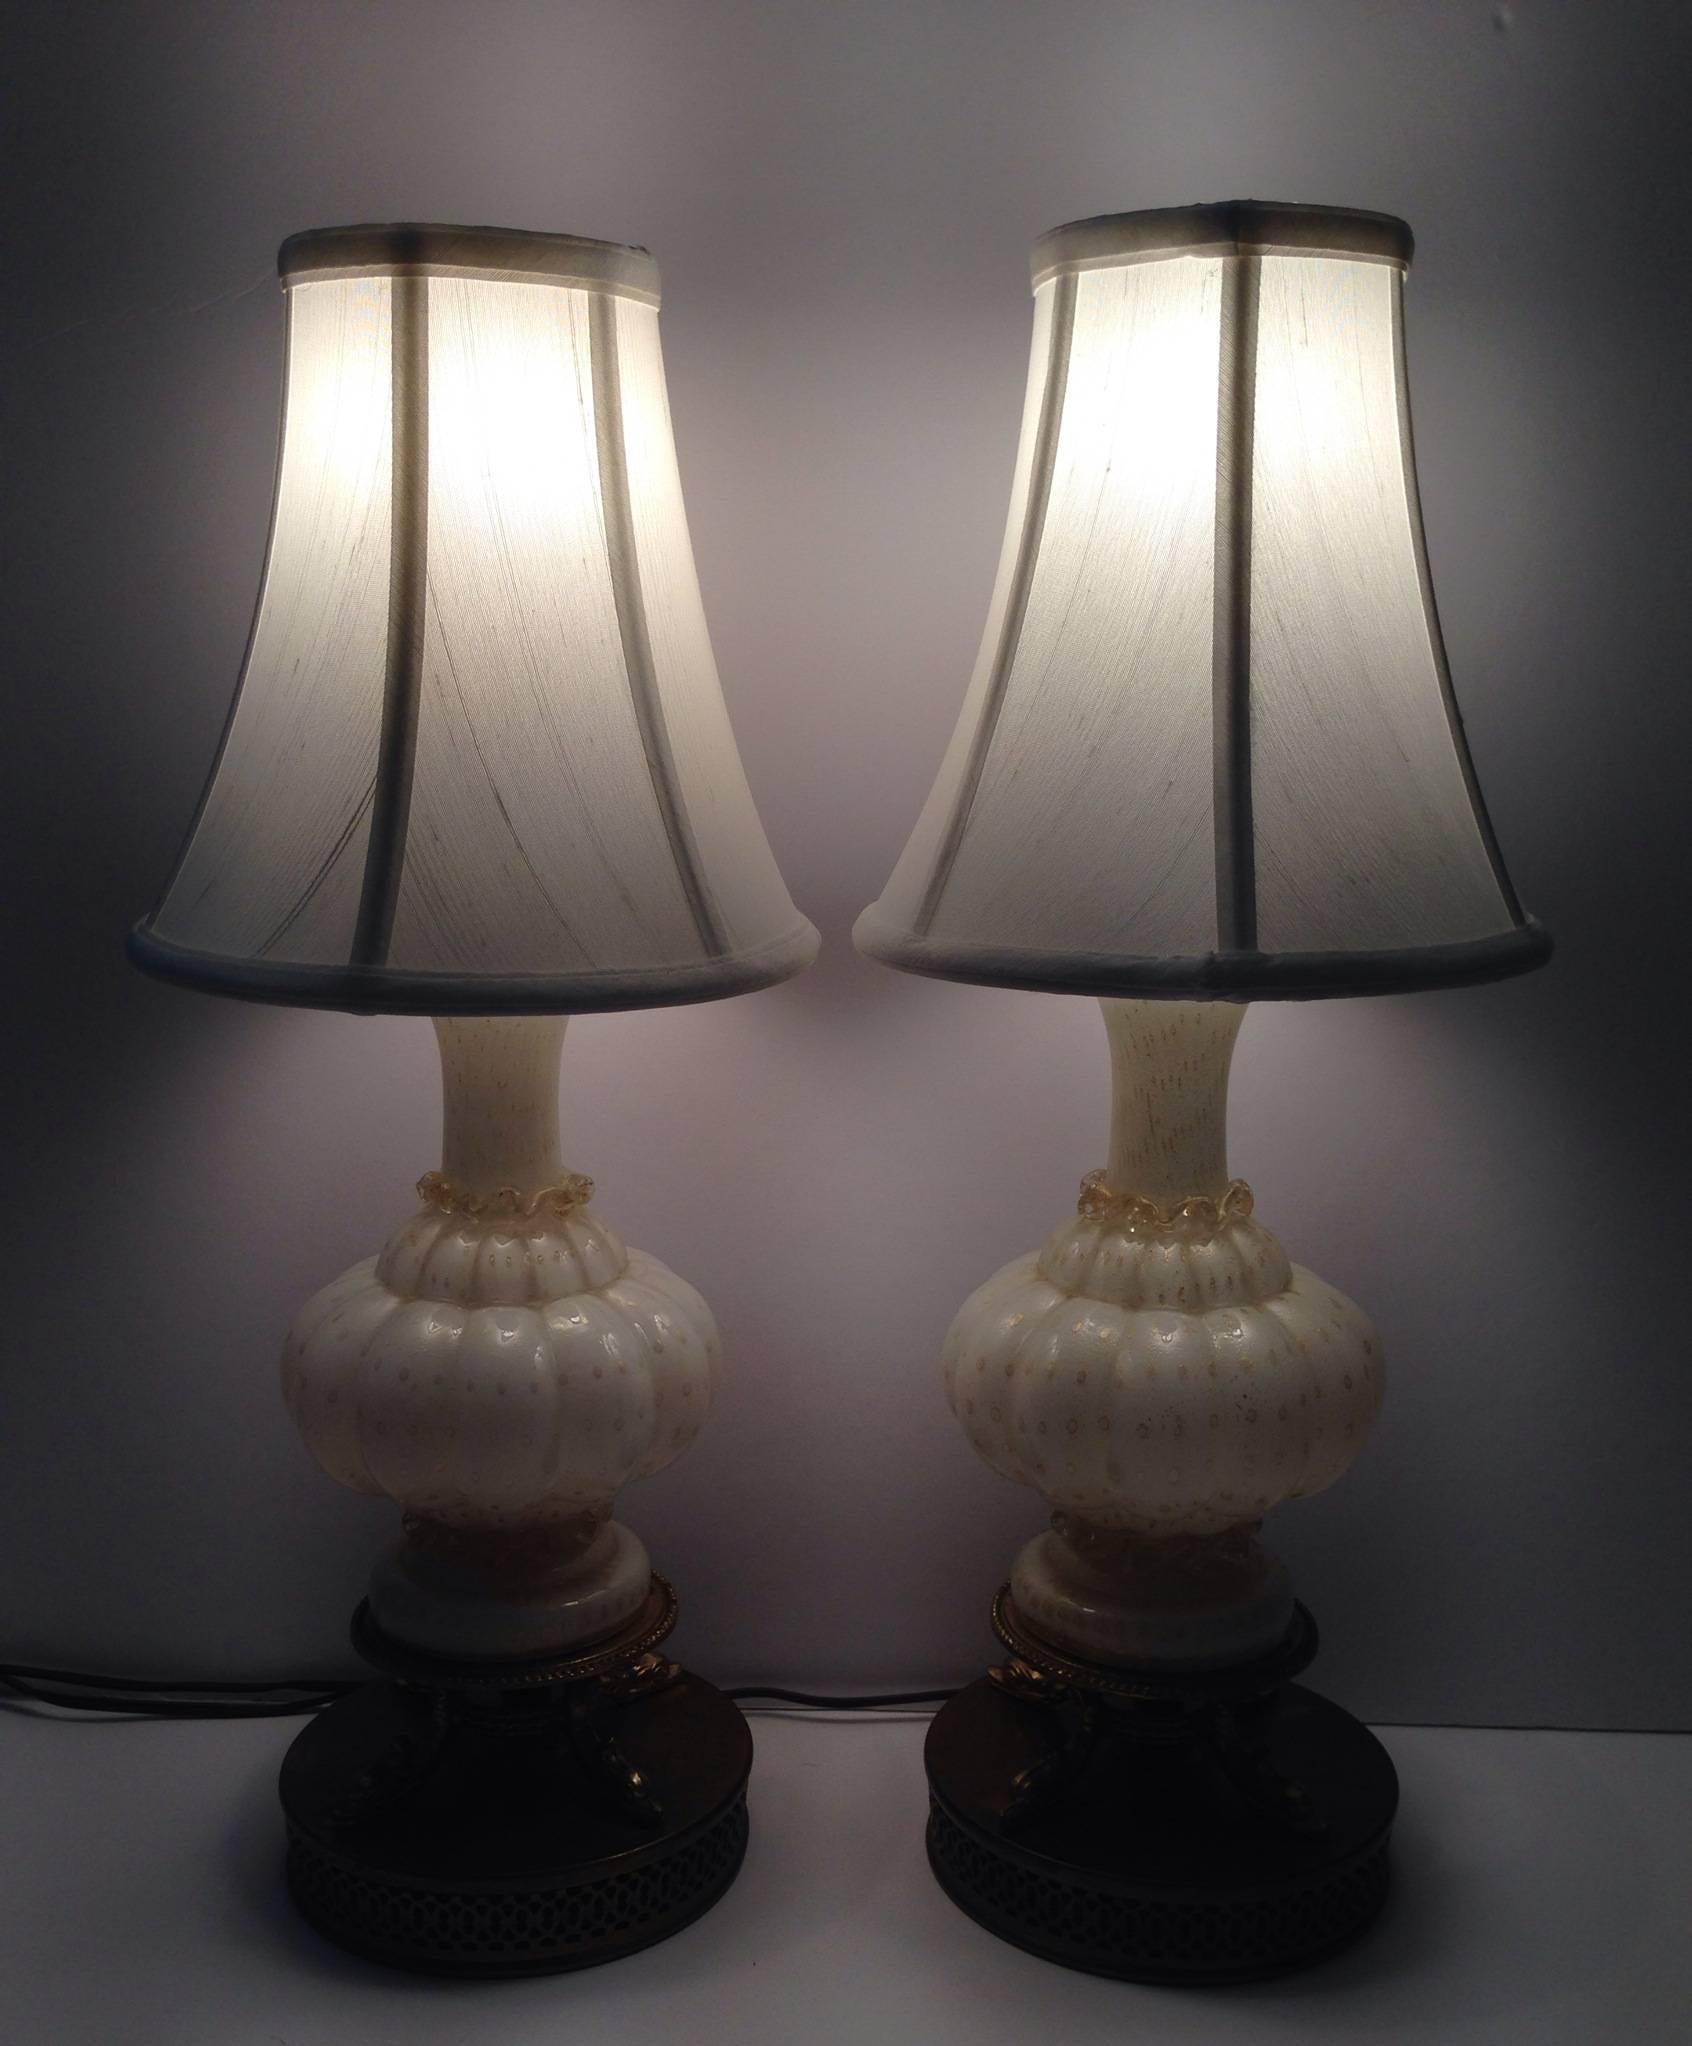 Antique and adorable pair of Italian white ribbed with 24-karat gold bullicante (controlled bubbles) and ribbon detail Murano glass lamps. Original brass bases. White silk shades are included.
Each lamp is 16" height from base to socket.